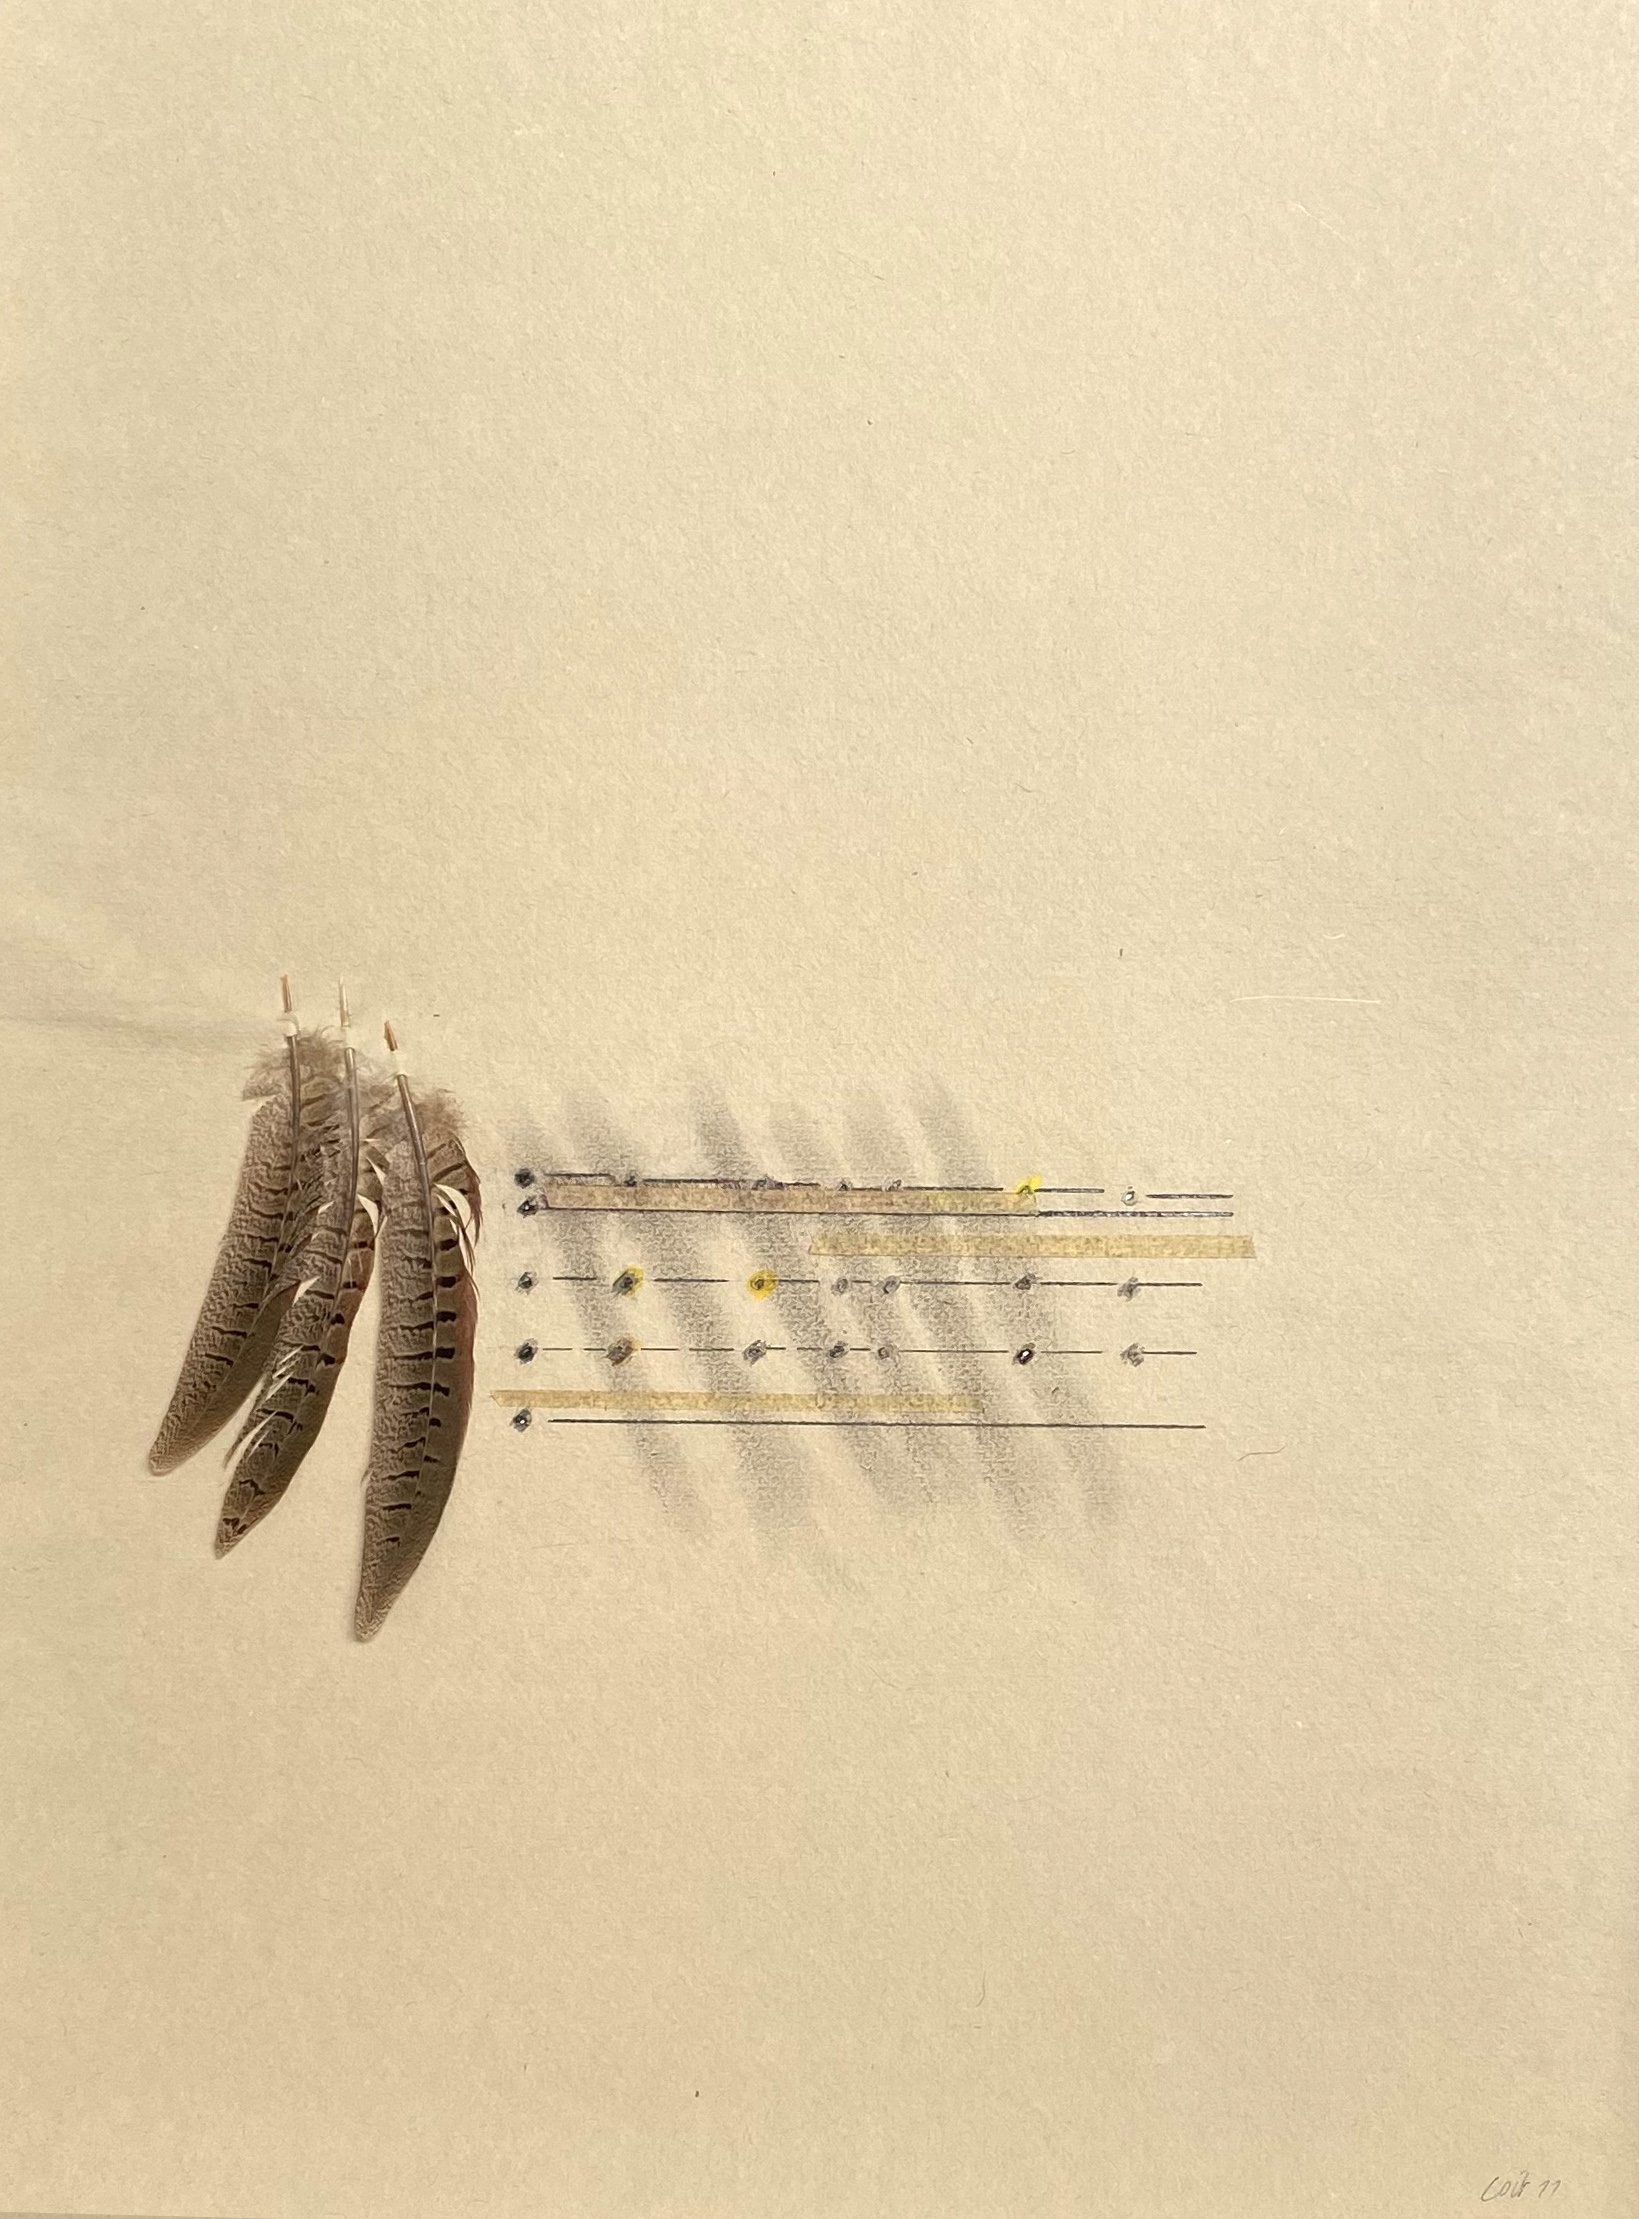 Untitled Feathers #9